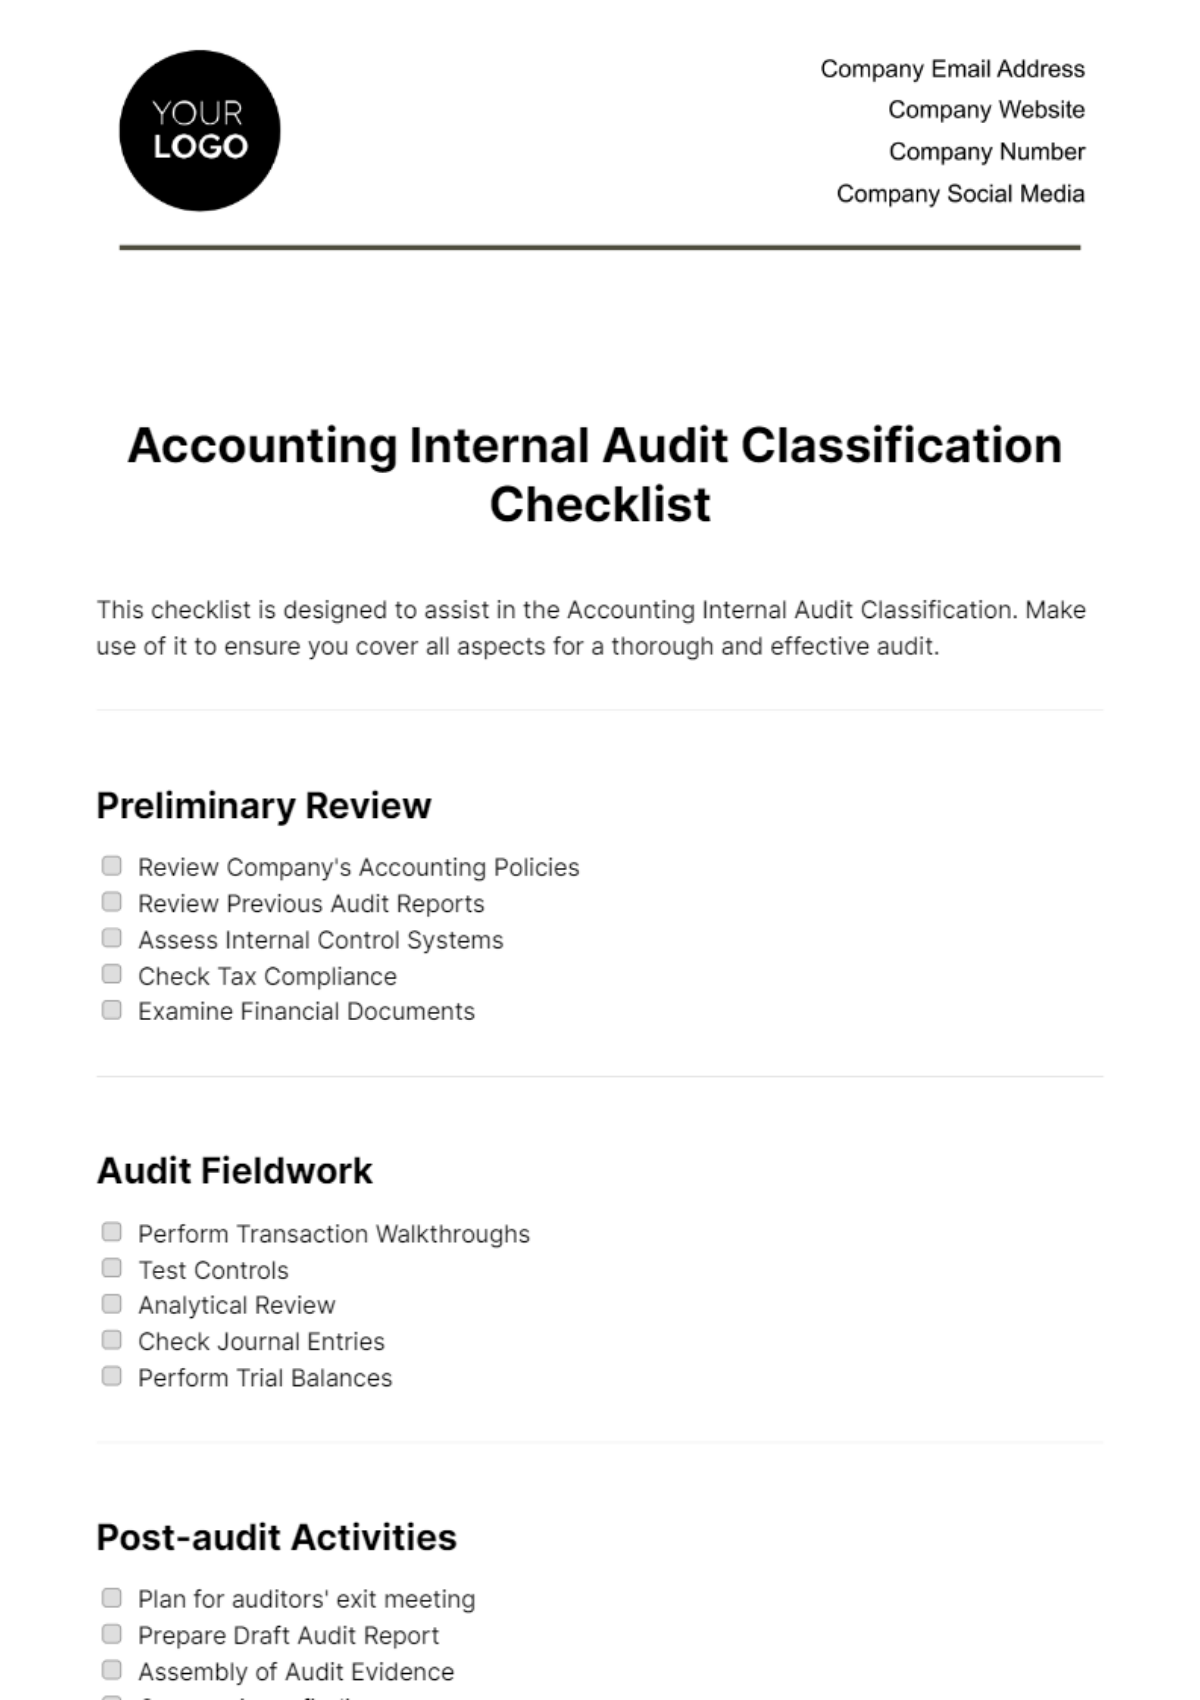 Free Accounting Internal Audit Classification Checklist Template